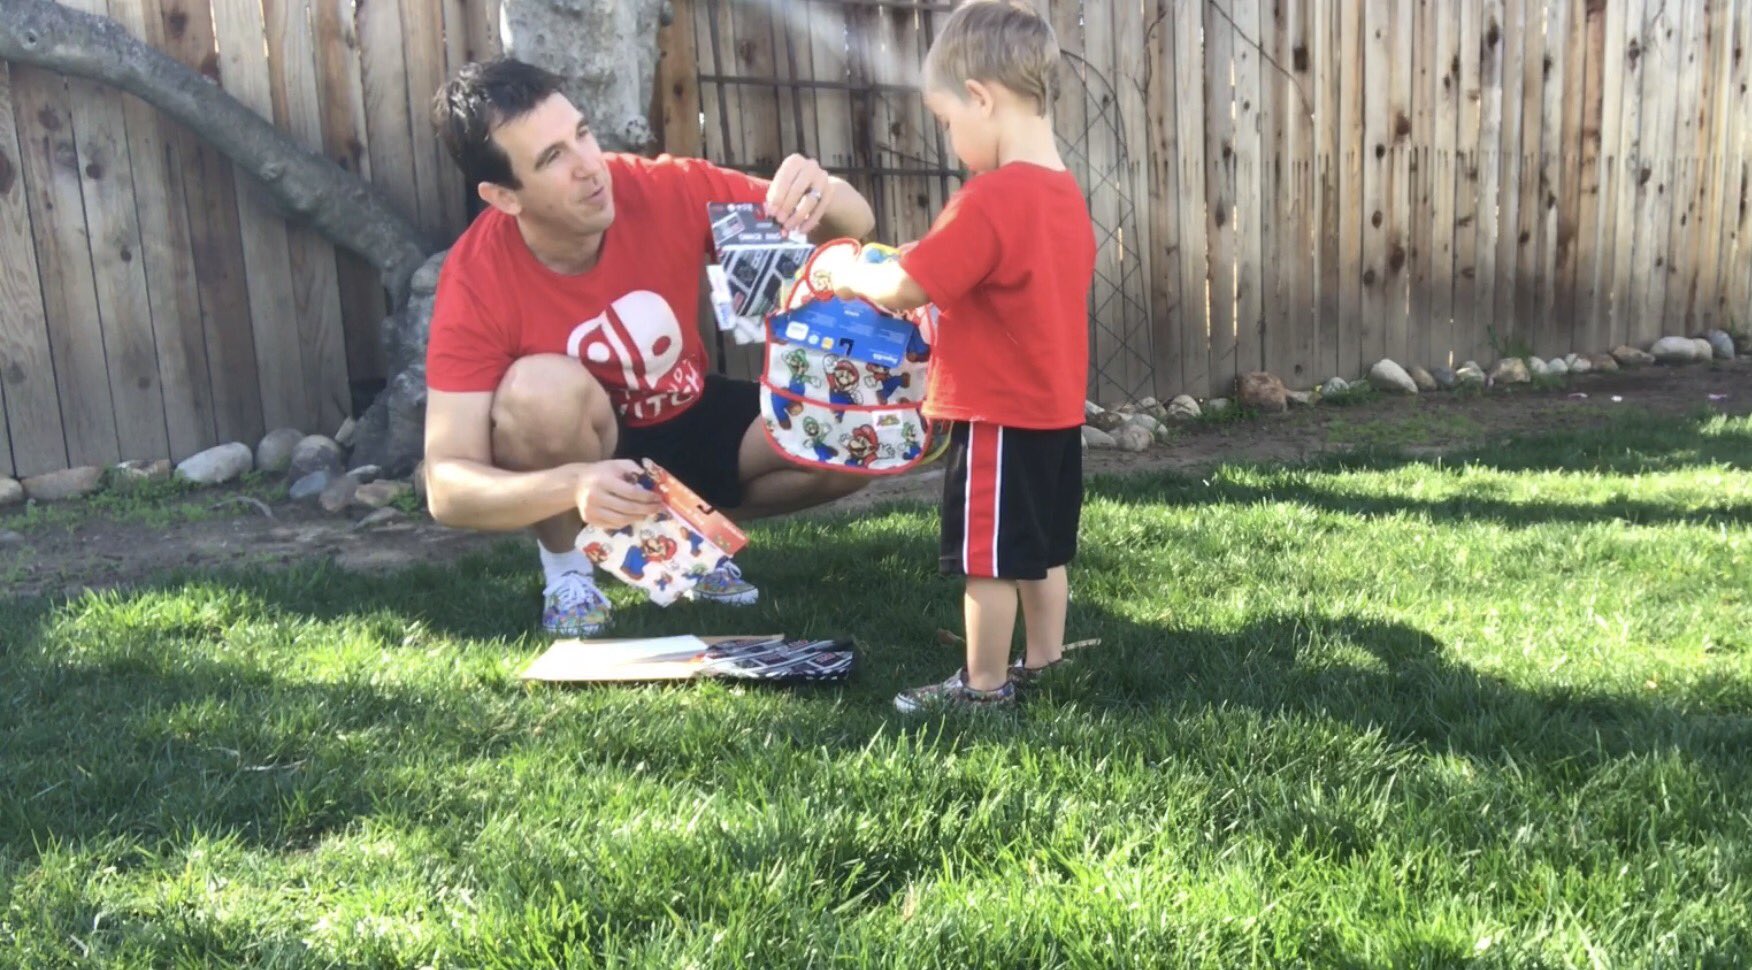 Bryson Paul Gale and Paul Gale Network wearing Nintendo Switch t-shirts while opening up Baby gifts sent by the Nintendo Social Media Team, for Brooke Zelda Gale!